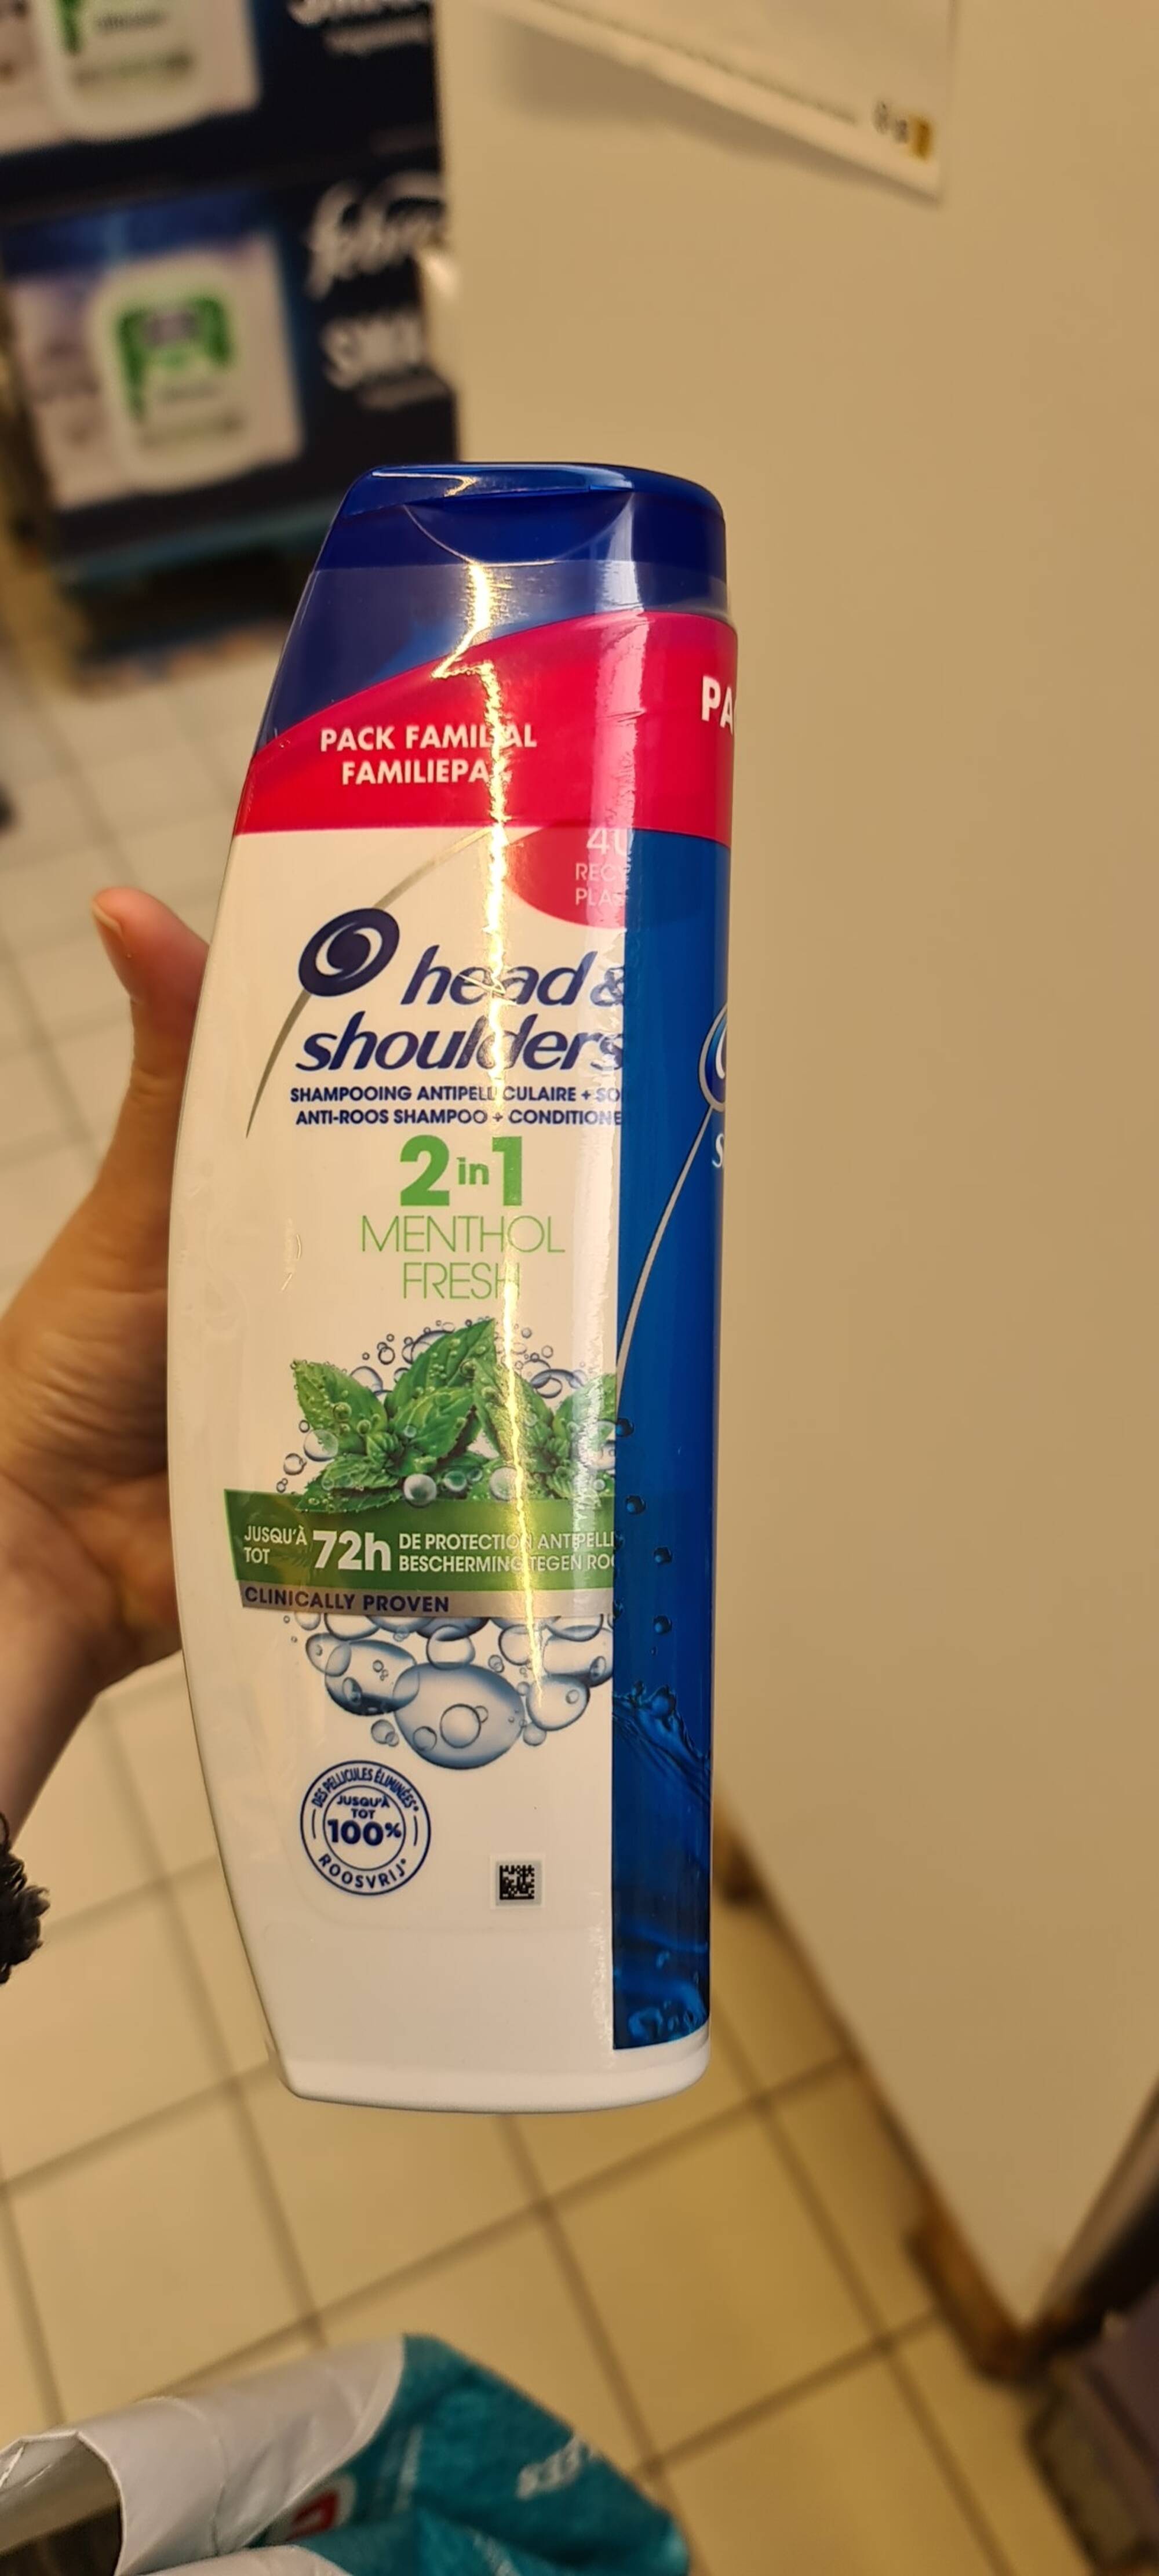 HEAD & SHOULDERS - Shampooing antipelliculaire 2 in 1 menthol fresh